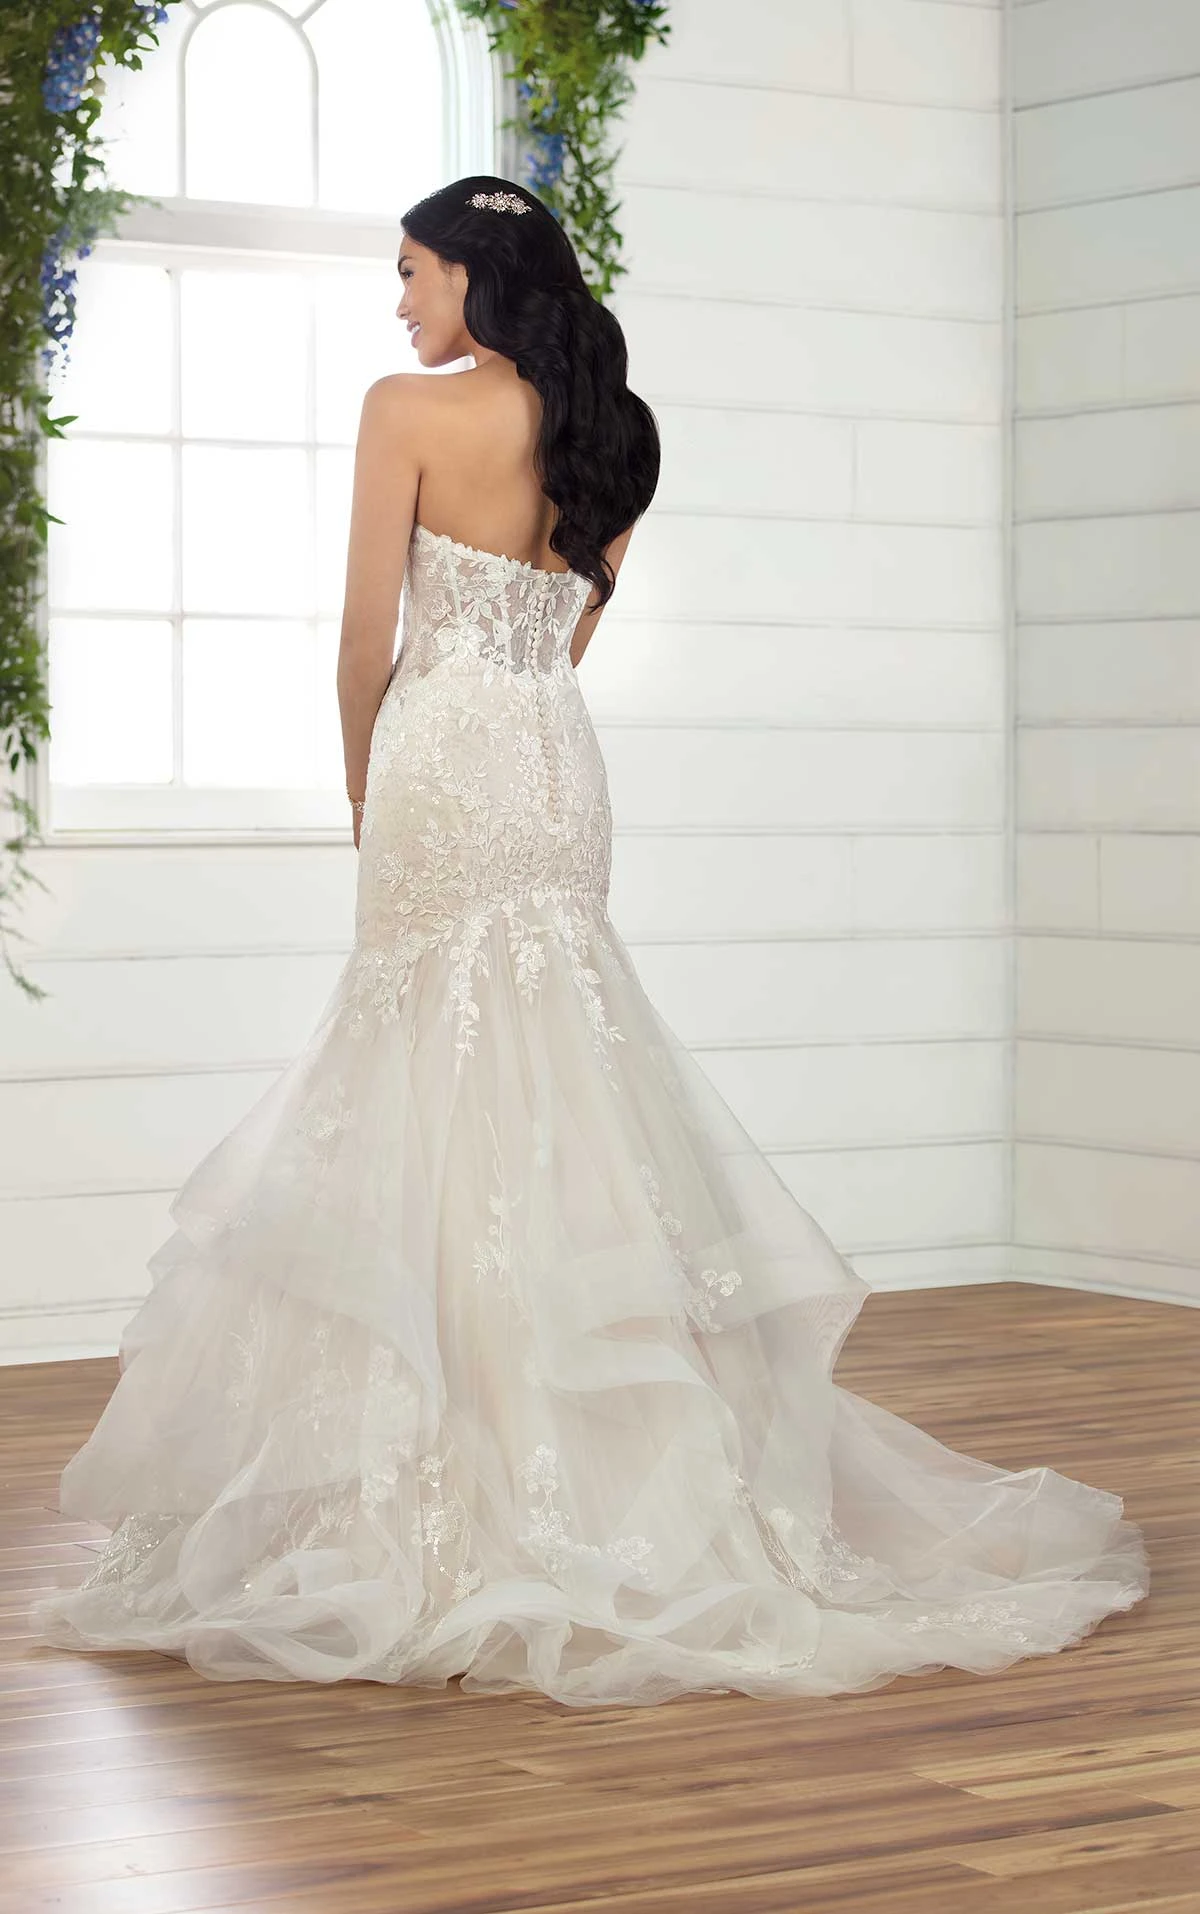 Romantic Mermaid Wedding Gown with Sparkling Floral Lace